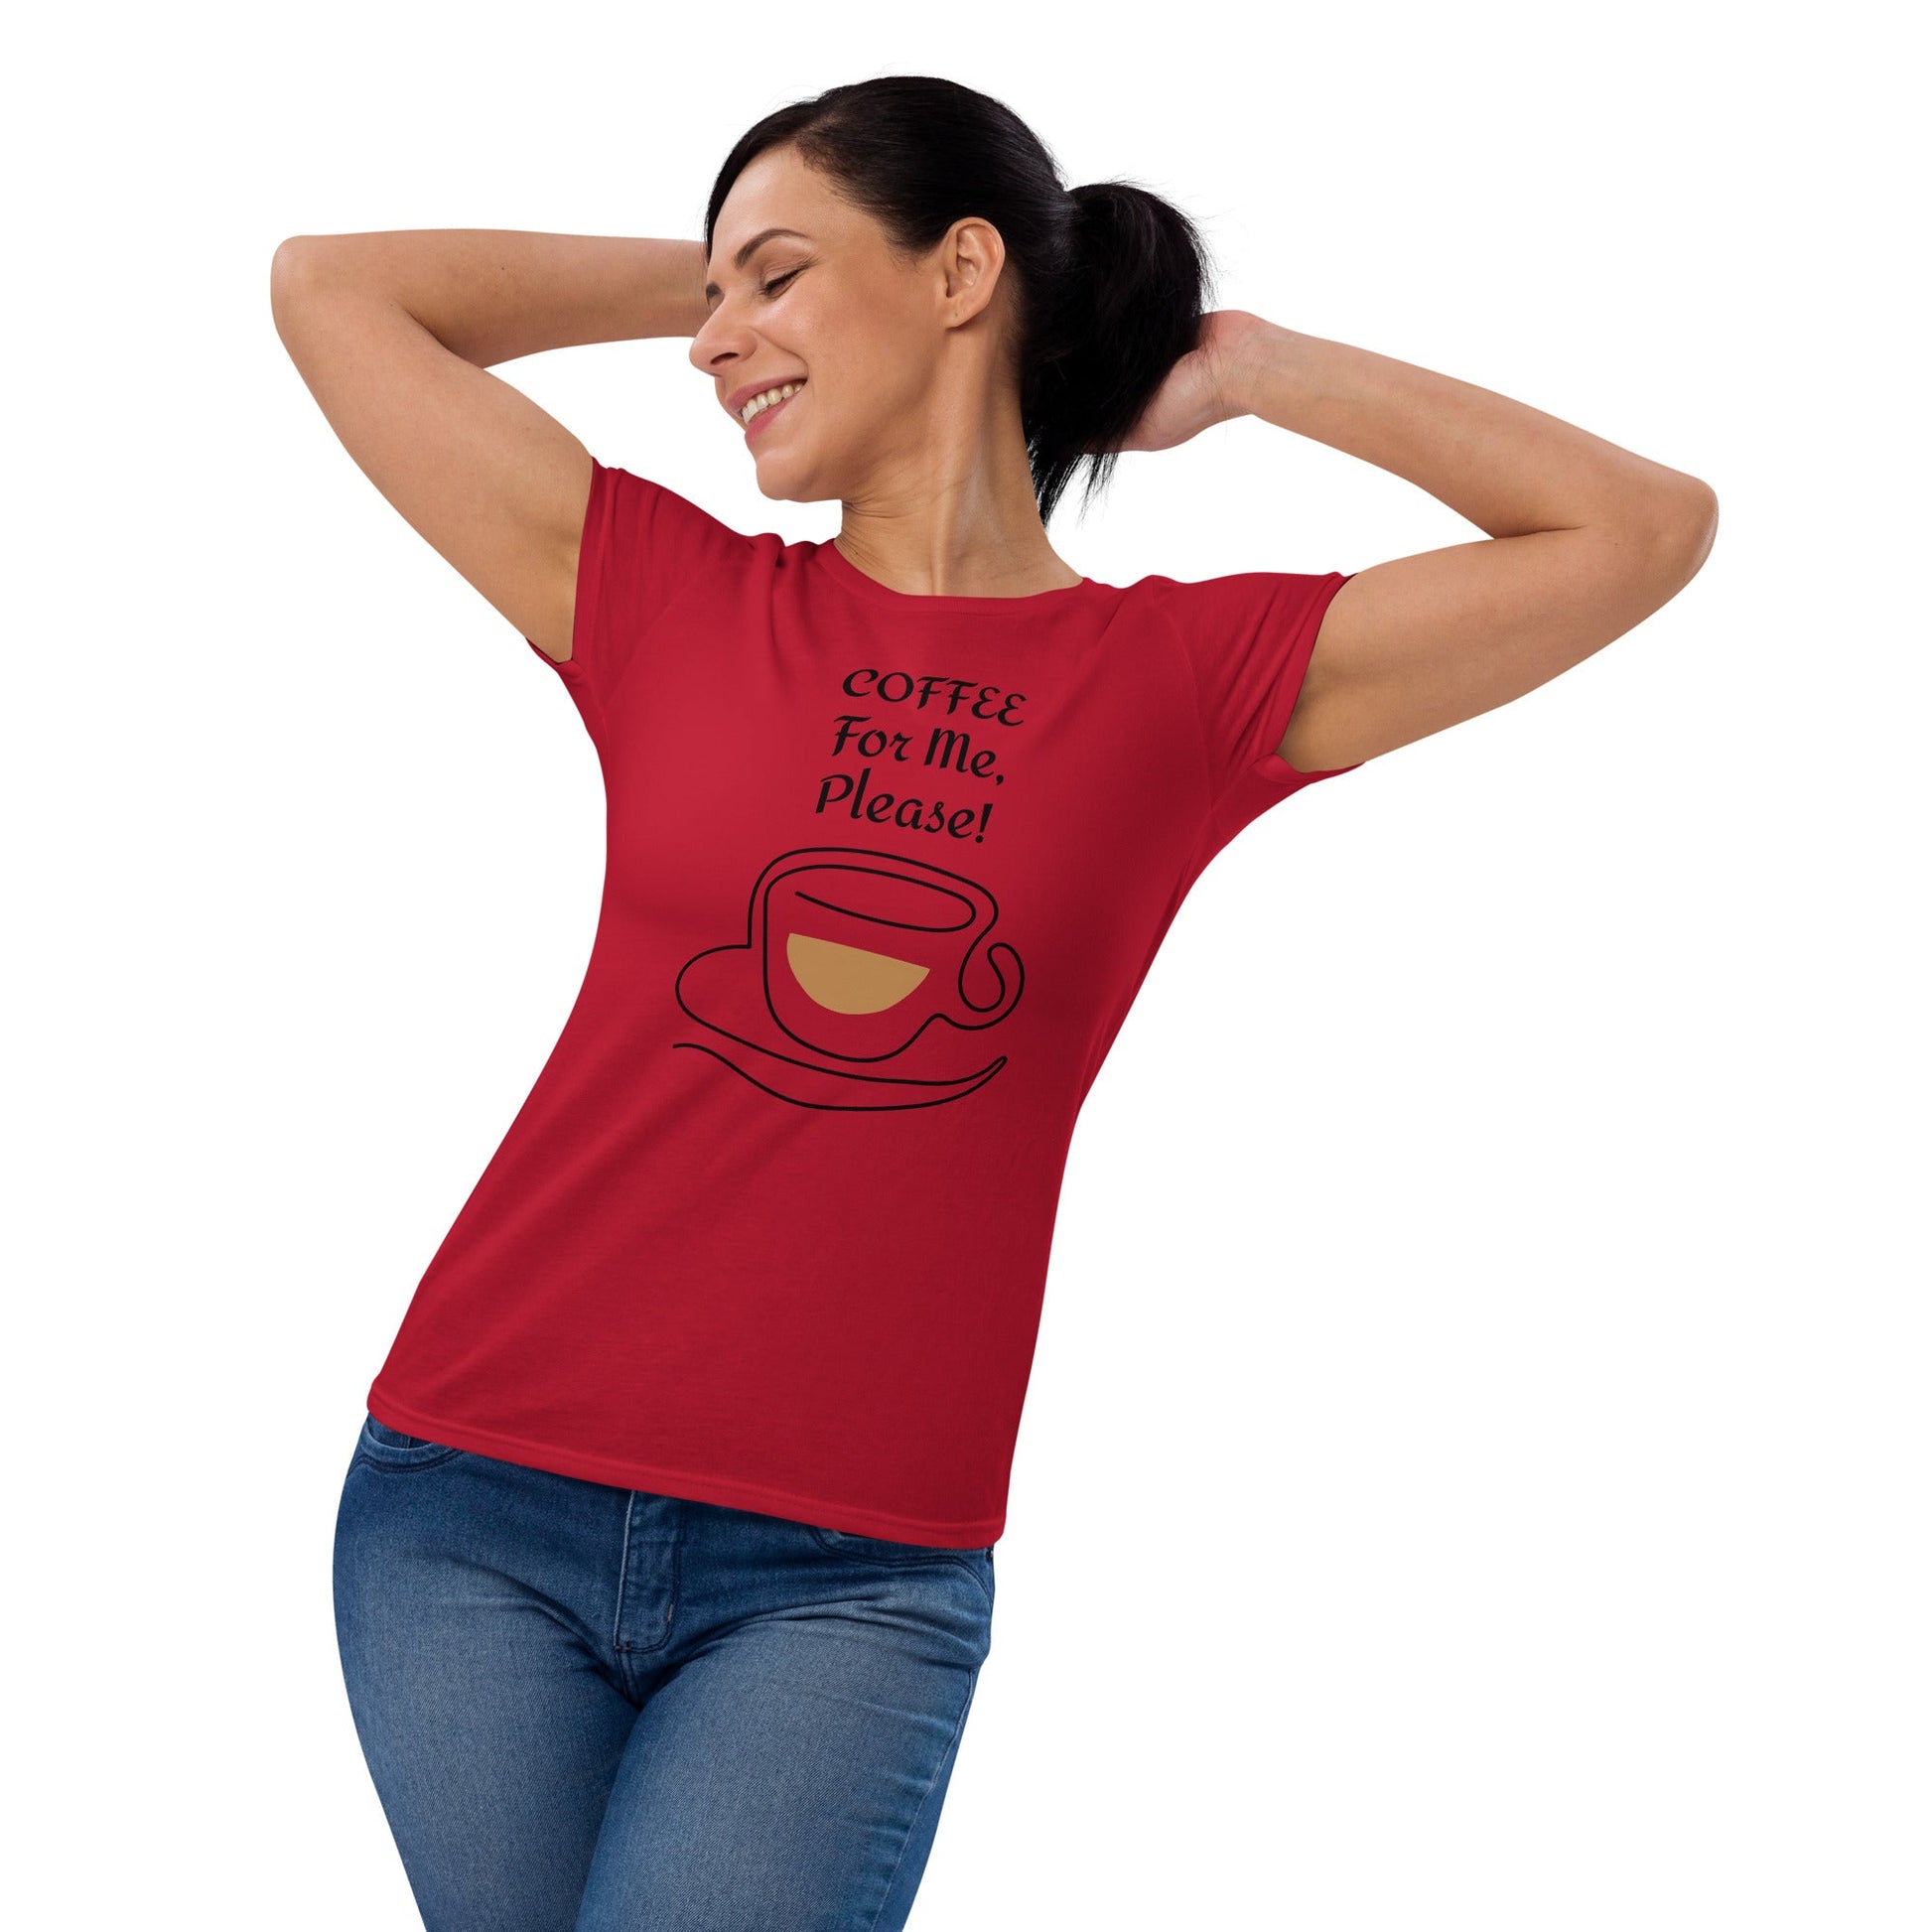 COFFEE For Me, Please! with Coffee Cup Image Women's short sleeve t-shirt - Lizard Vigilante